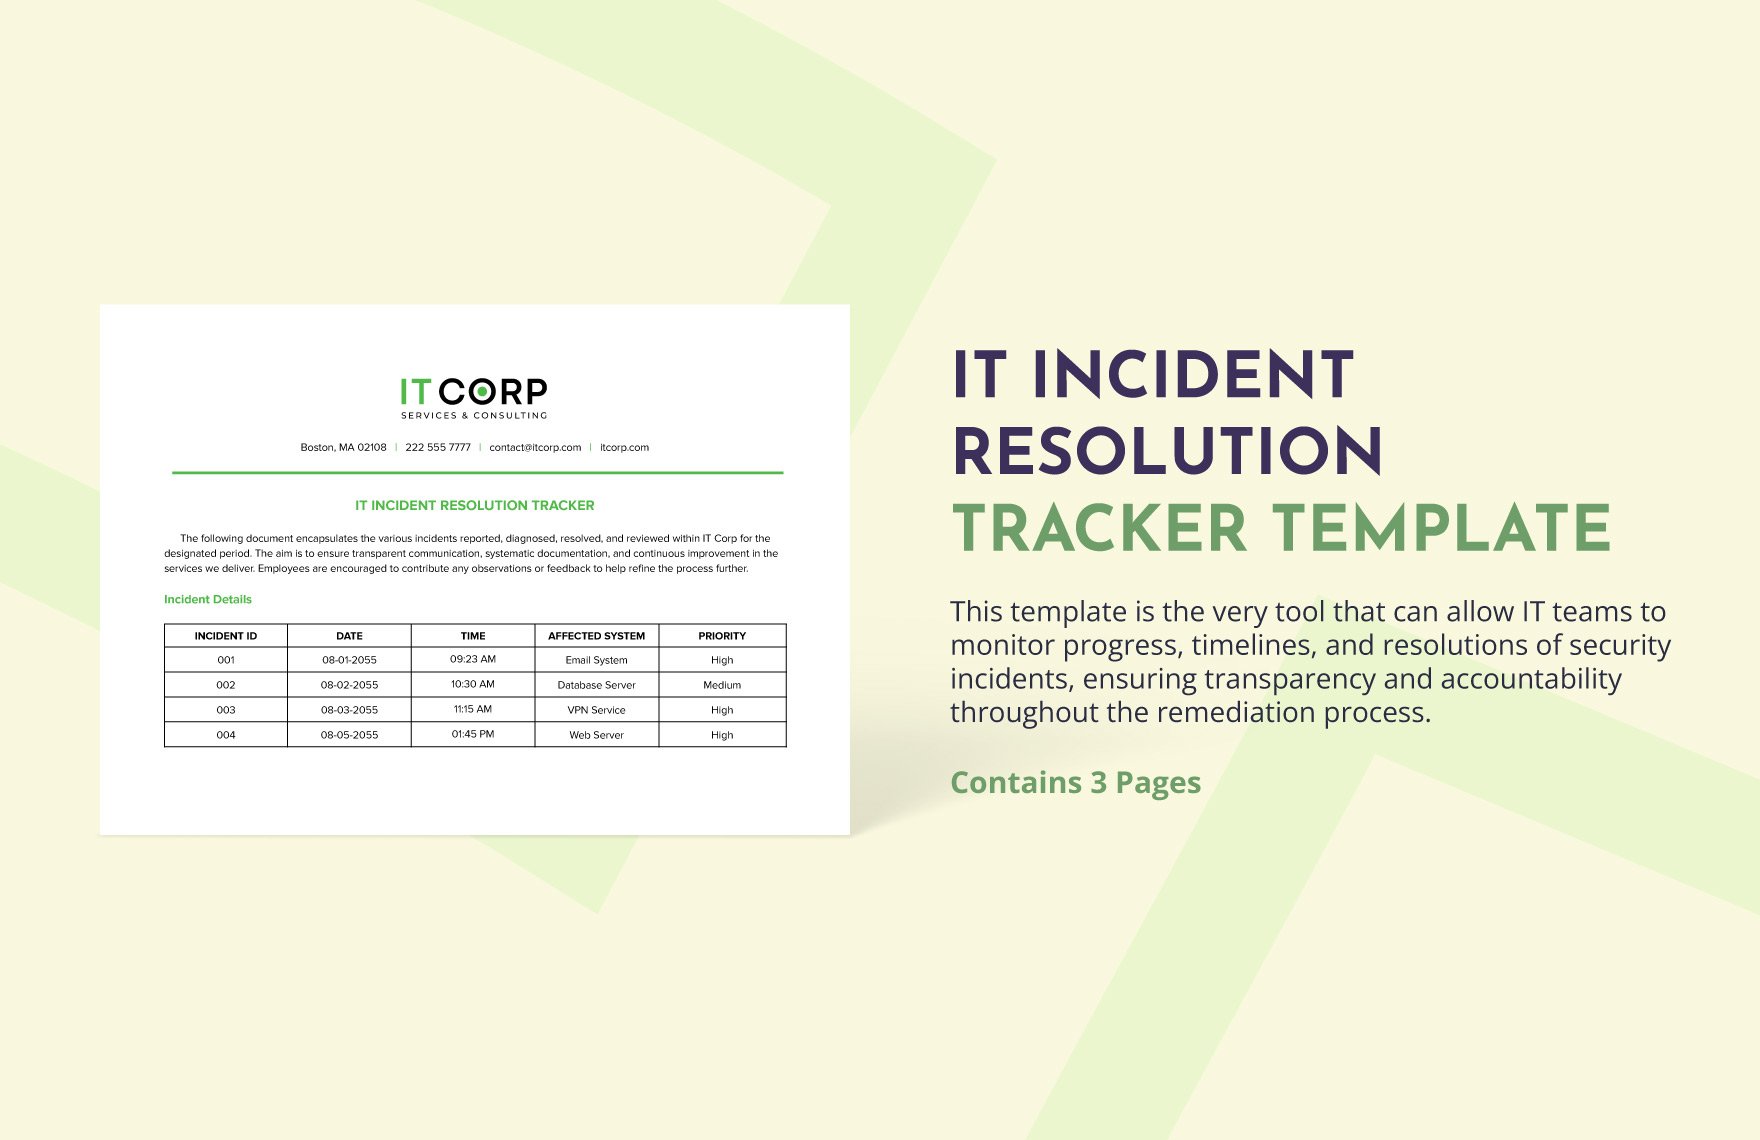 IT Incident Resolution Tracker Template in Word, Google Docs, PDF